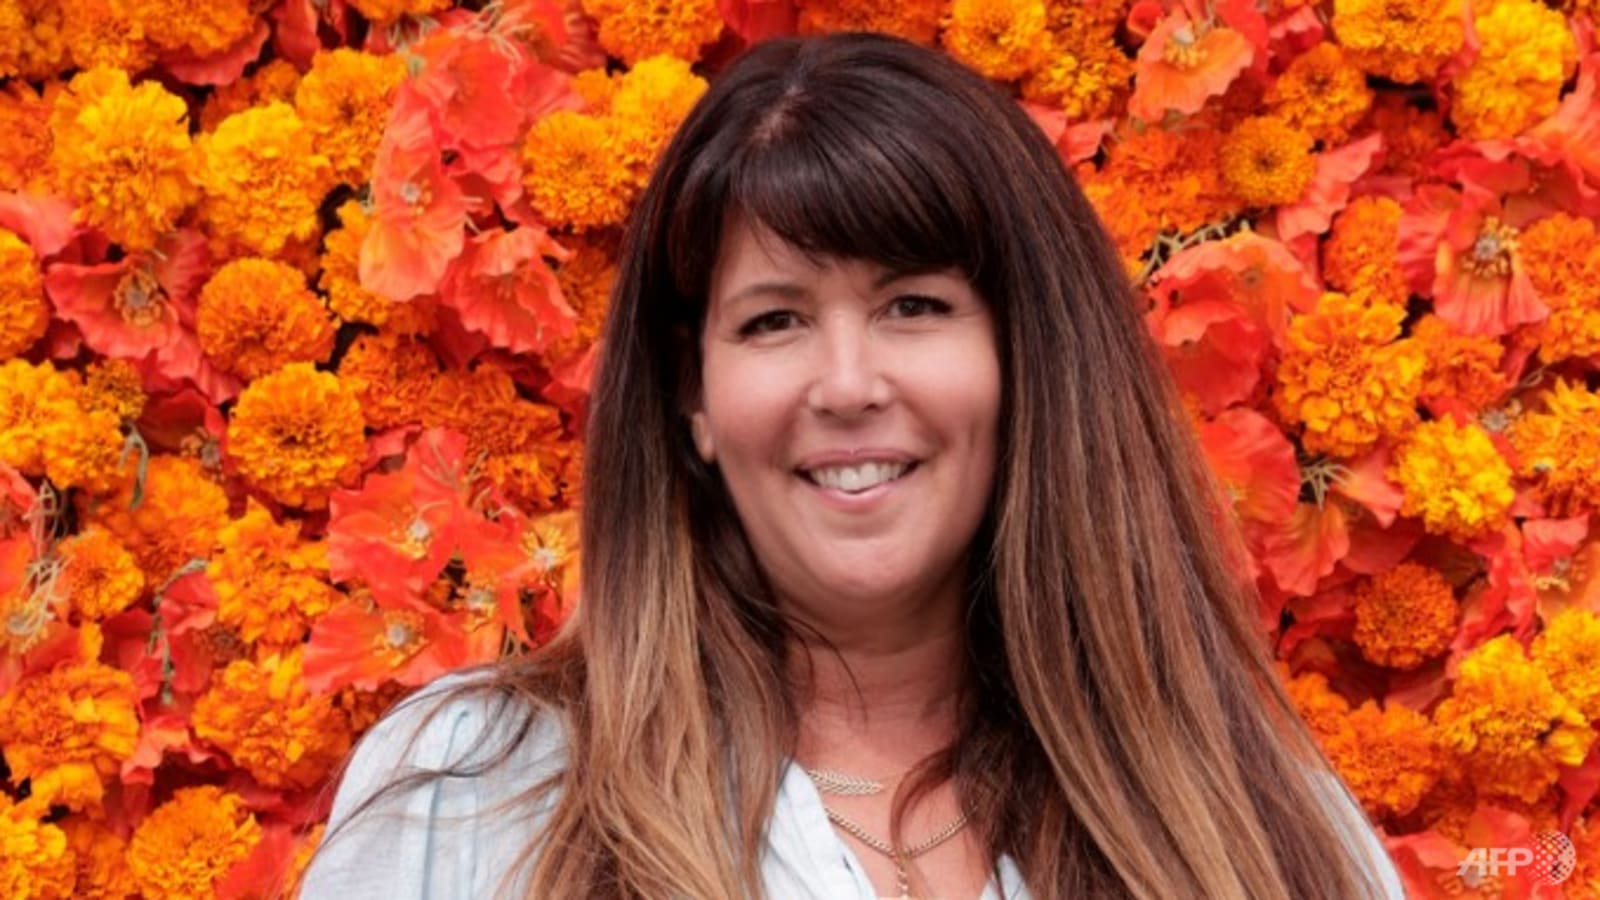 star-wars-movies-by-patty-jenkins-and-kevin-feige-have-been-shelved